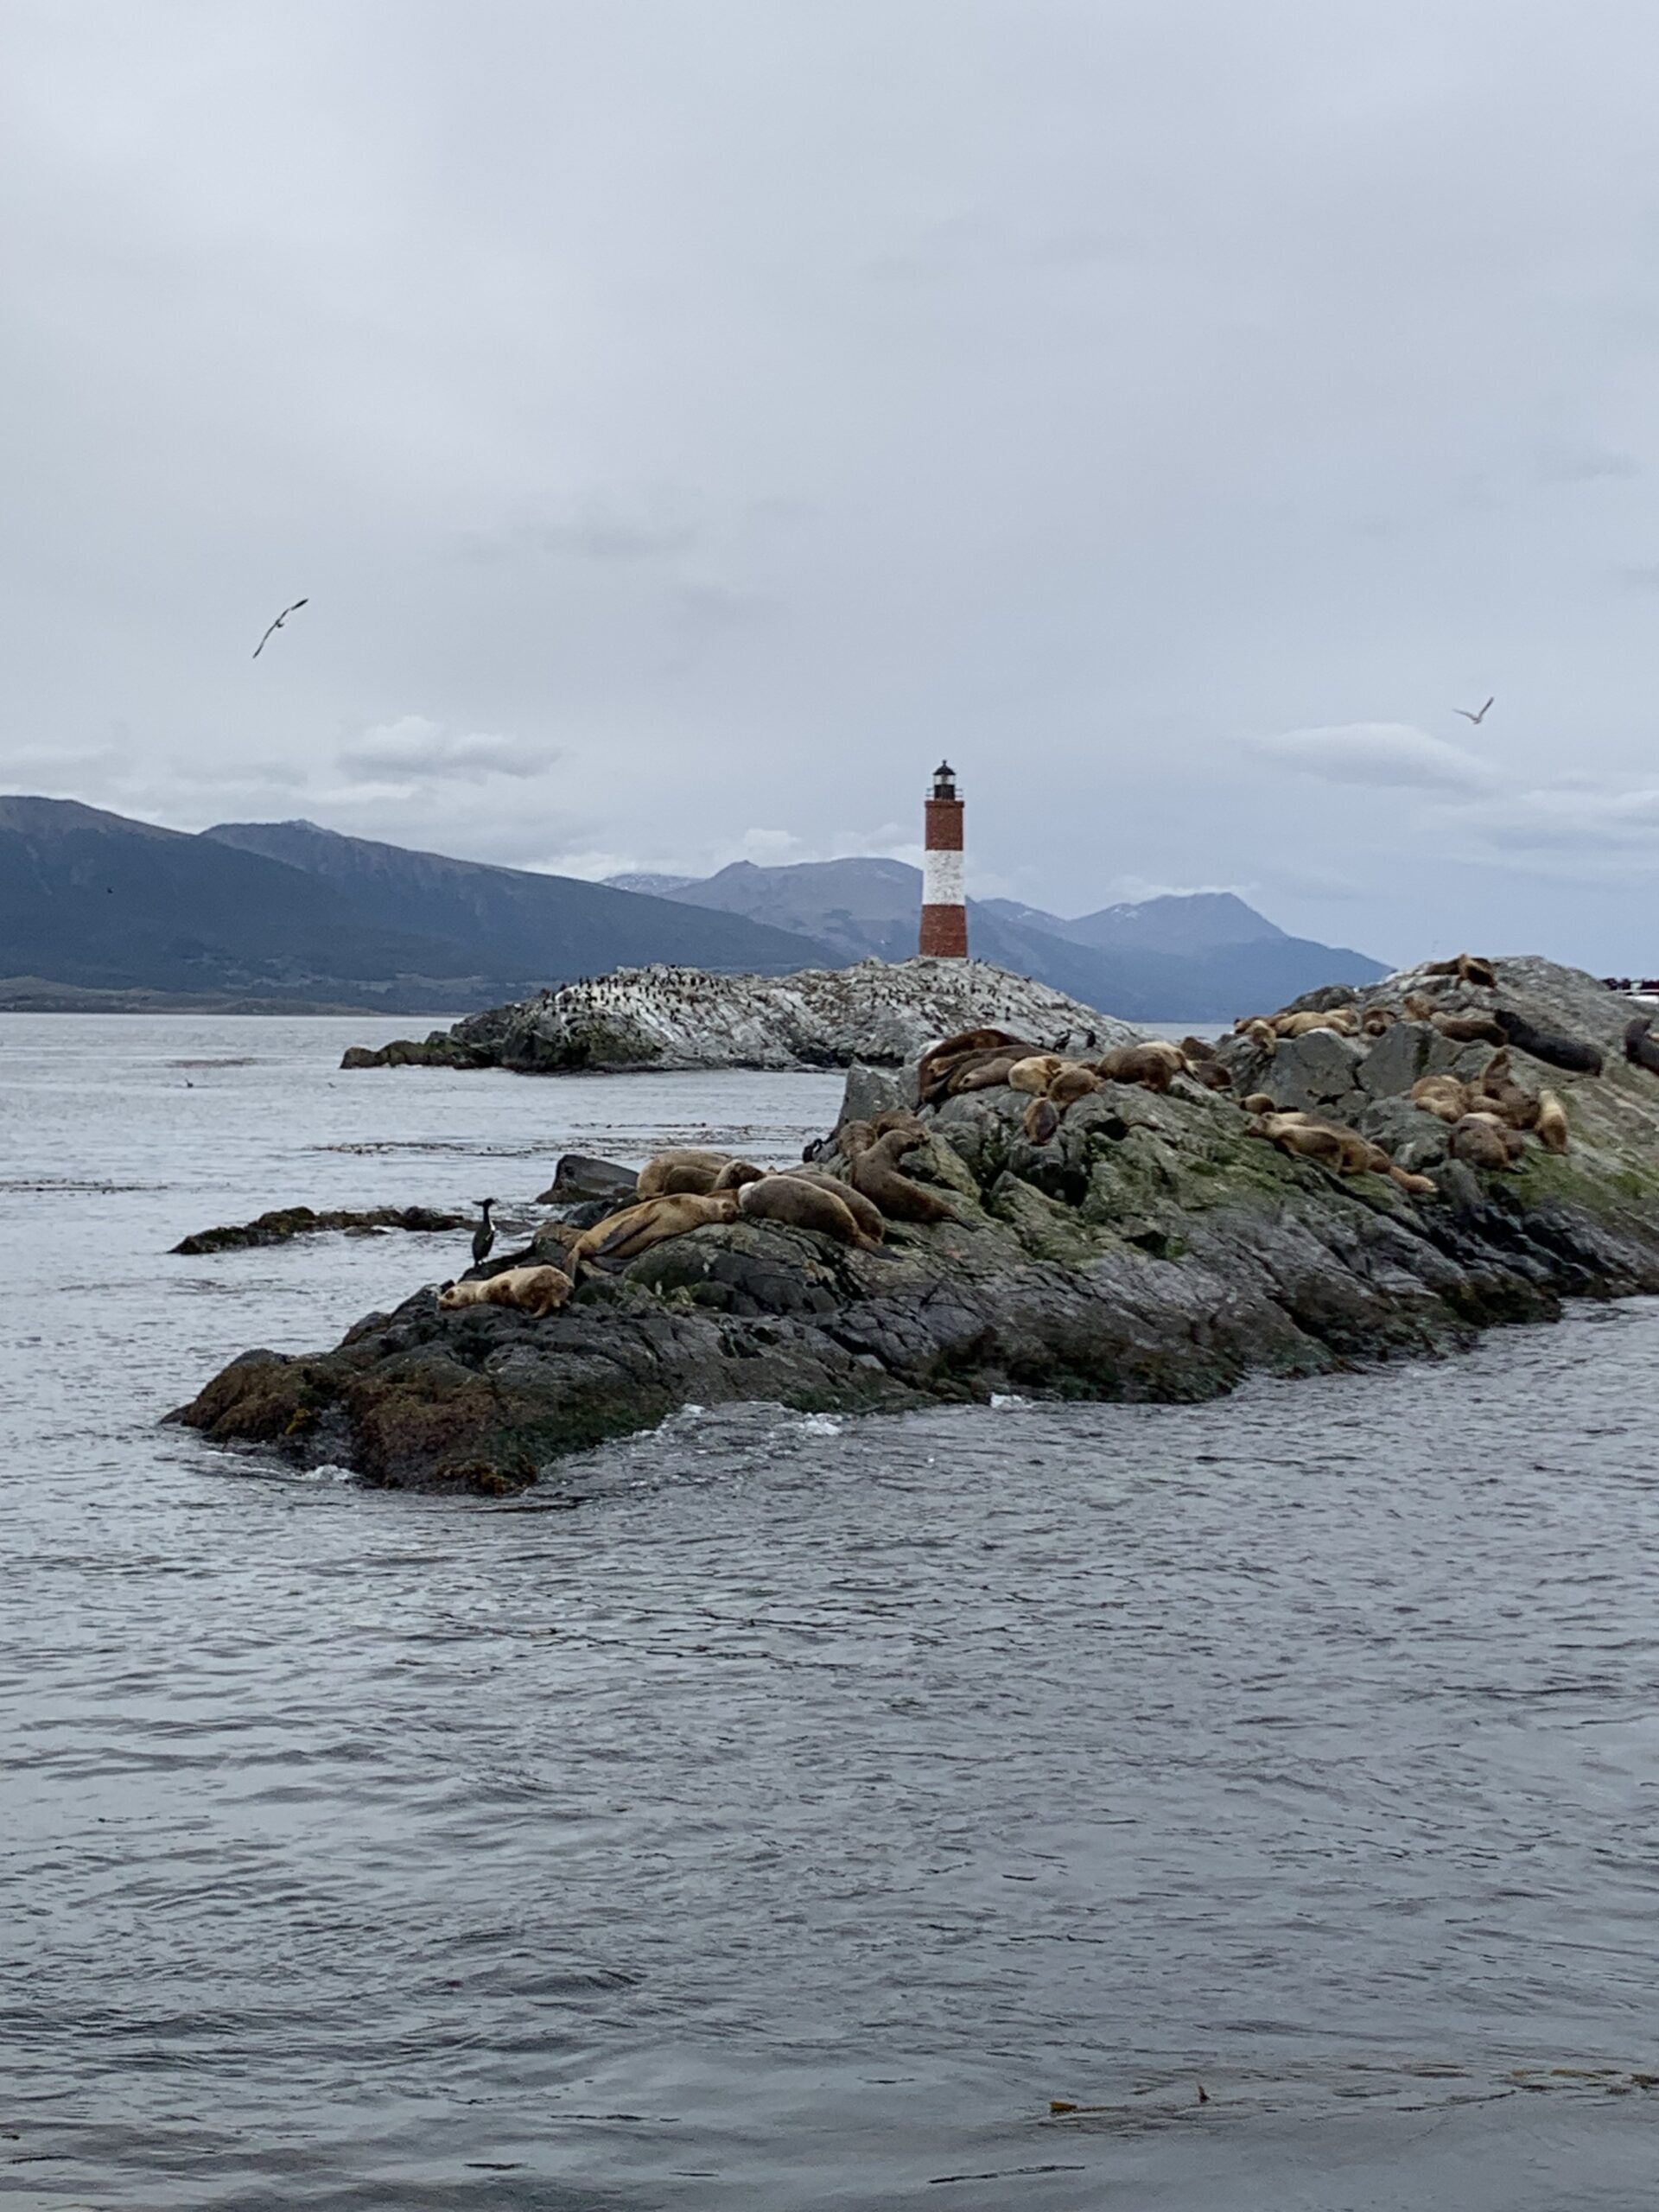 Sea Lions Colony with Lighthouse and Les Eclaireurs Lighthouse